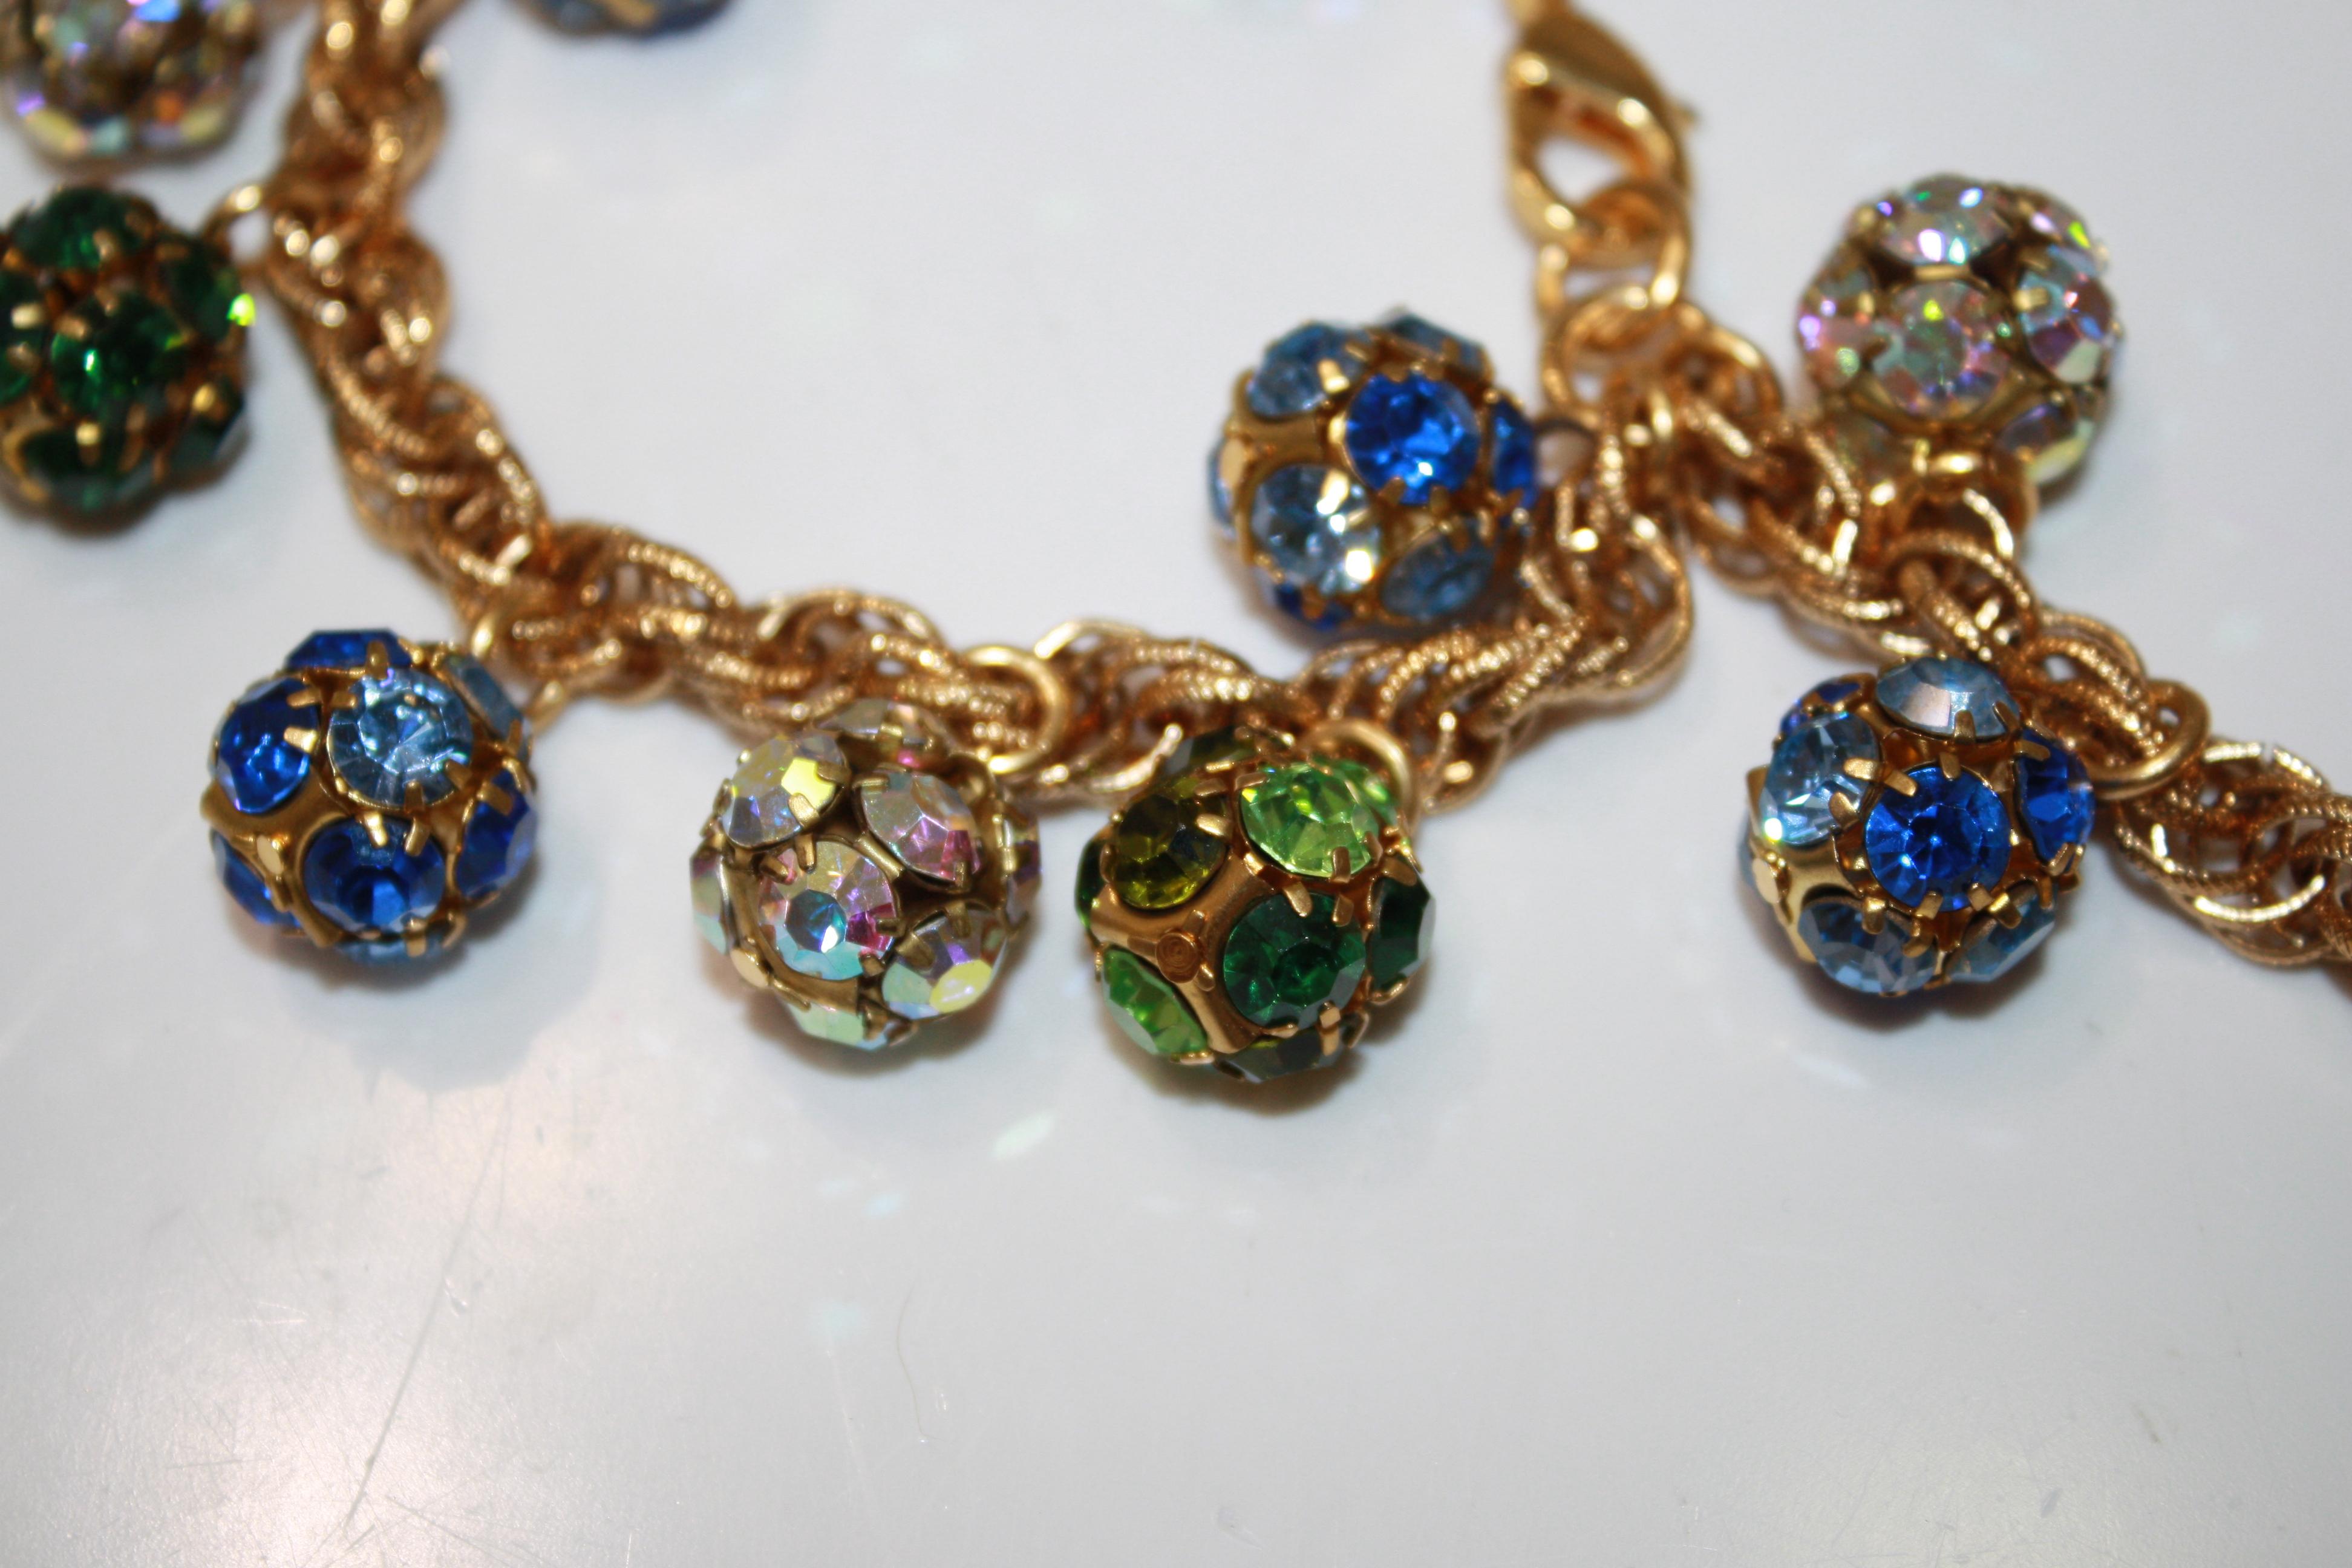 Gilded brass chain with Swarovski Crystal in blues and green. Adjustable size .
A fun statement for all season 